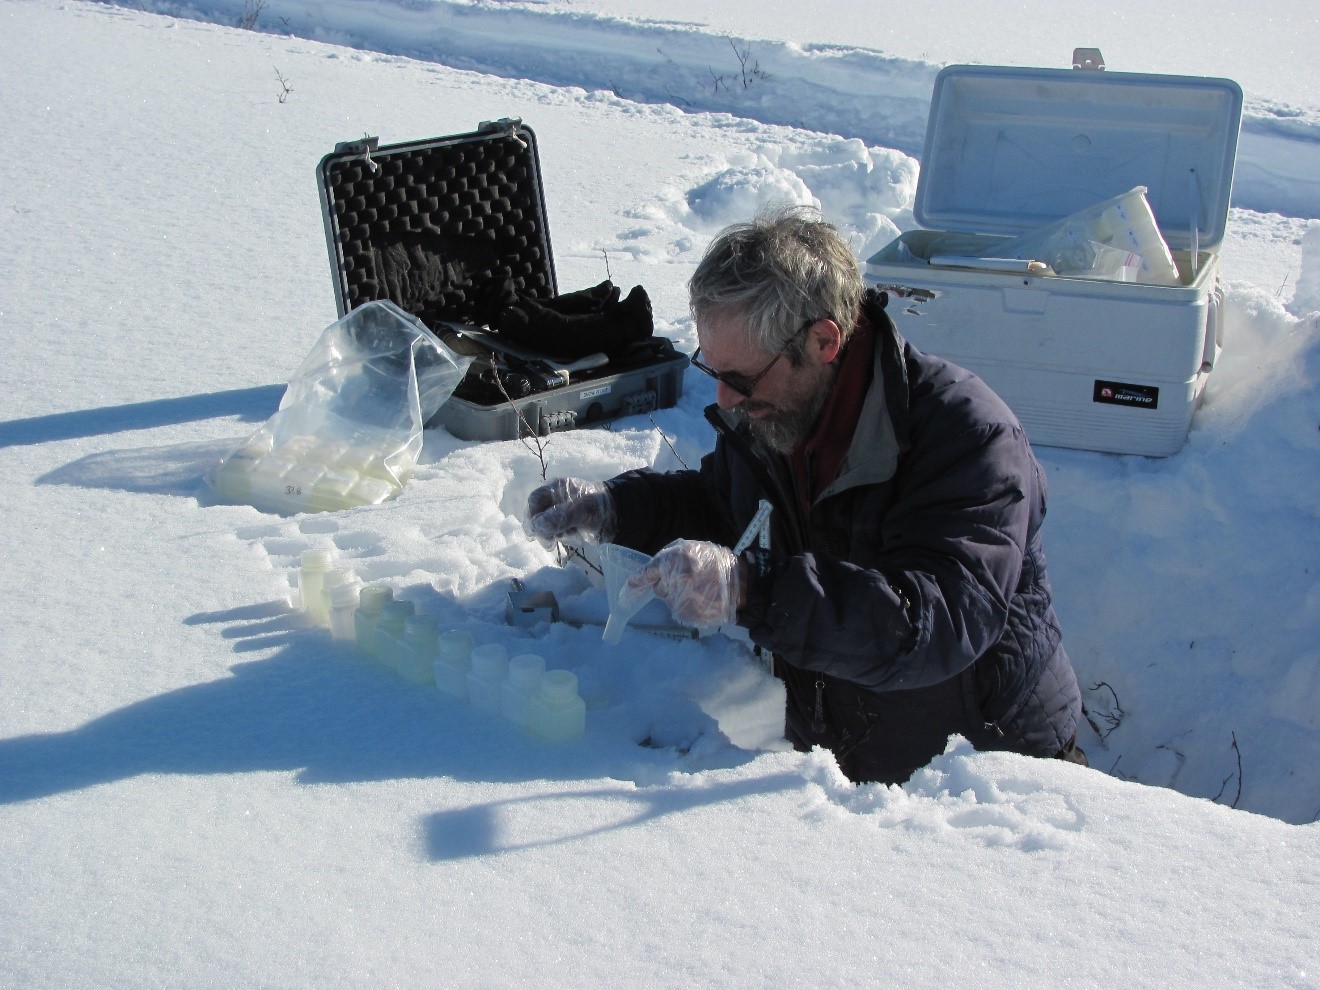 Standing in a field-site pit, Matthew Sturm collects snow samples. Different types influence the albedo of snow cover. 